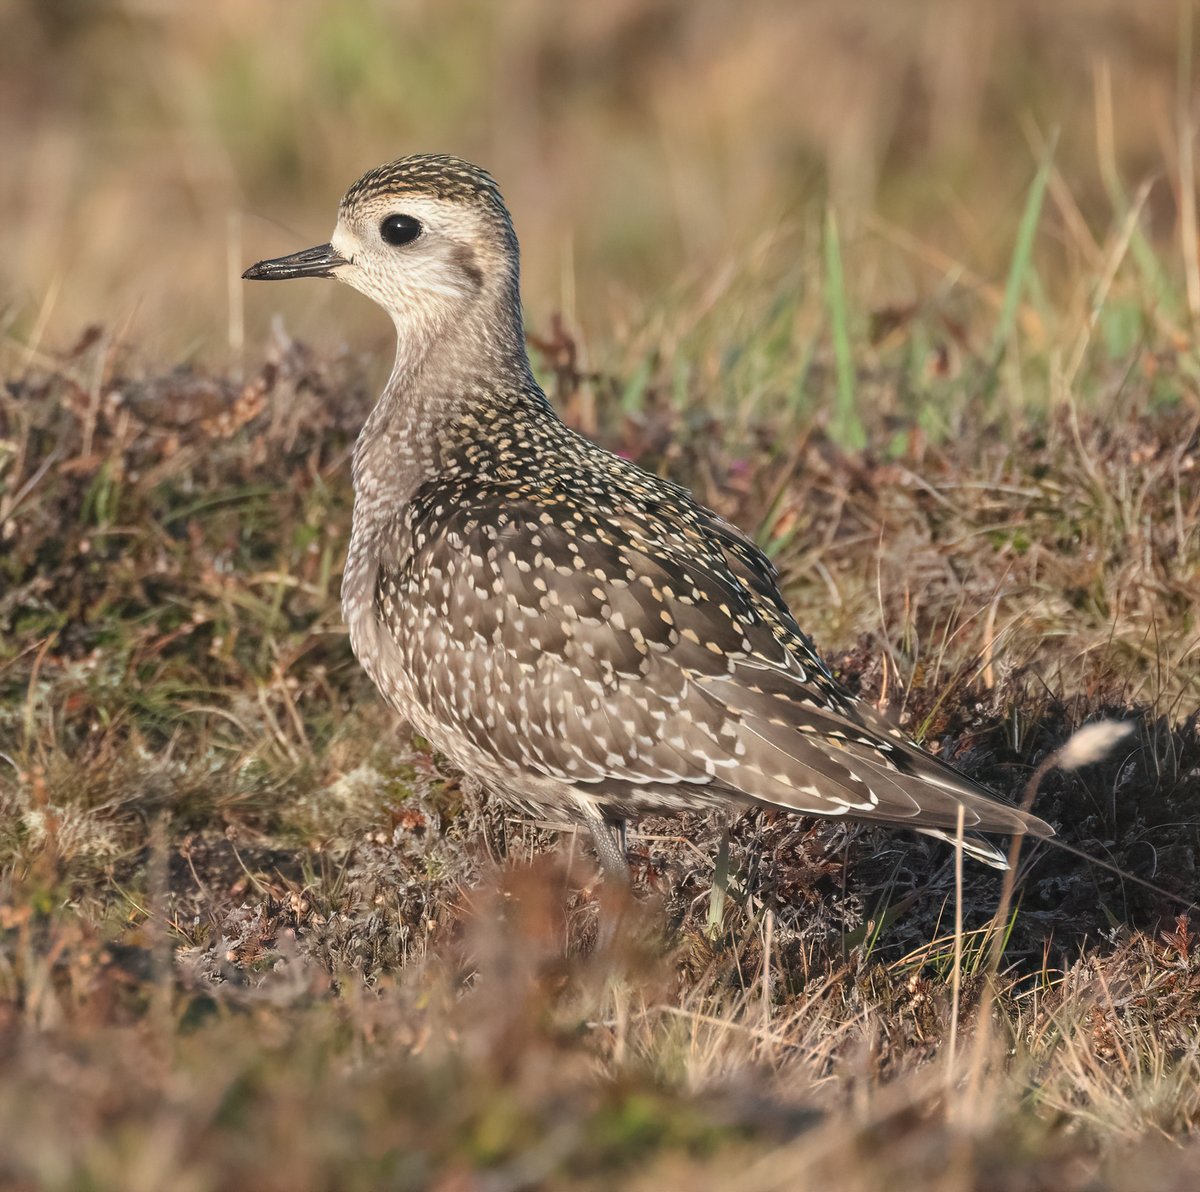 Very pleased to catch up with the American Golden Plover @FI_Obs today, found by @Georgia_Platt_ a couple of days ago and finally pinned down by @SteveArlow today. Showed beautifully in the afternoon sunshine!